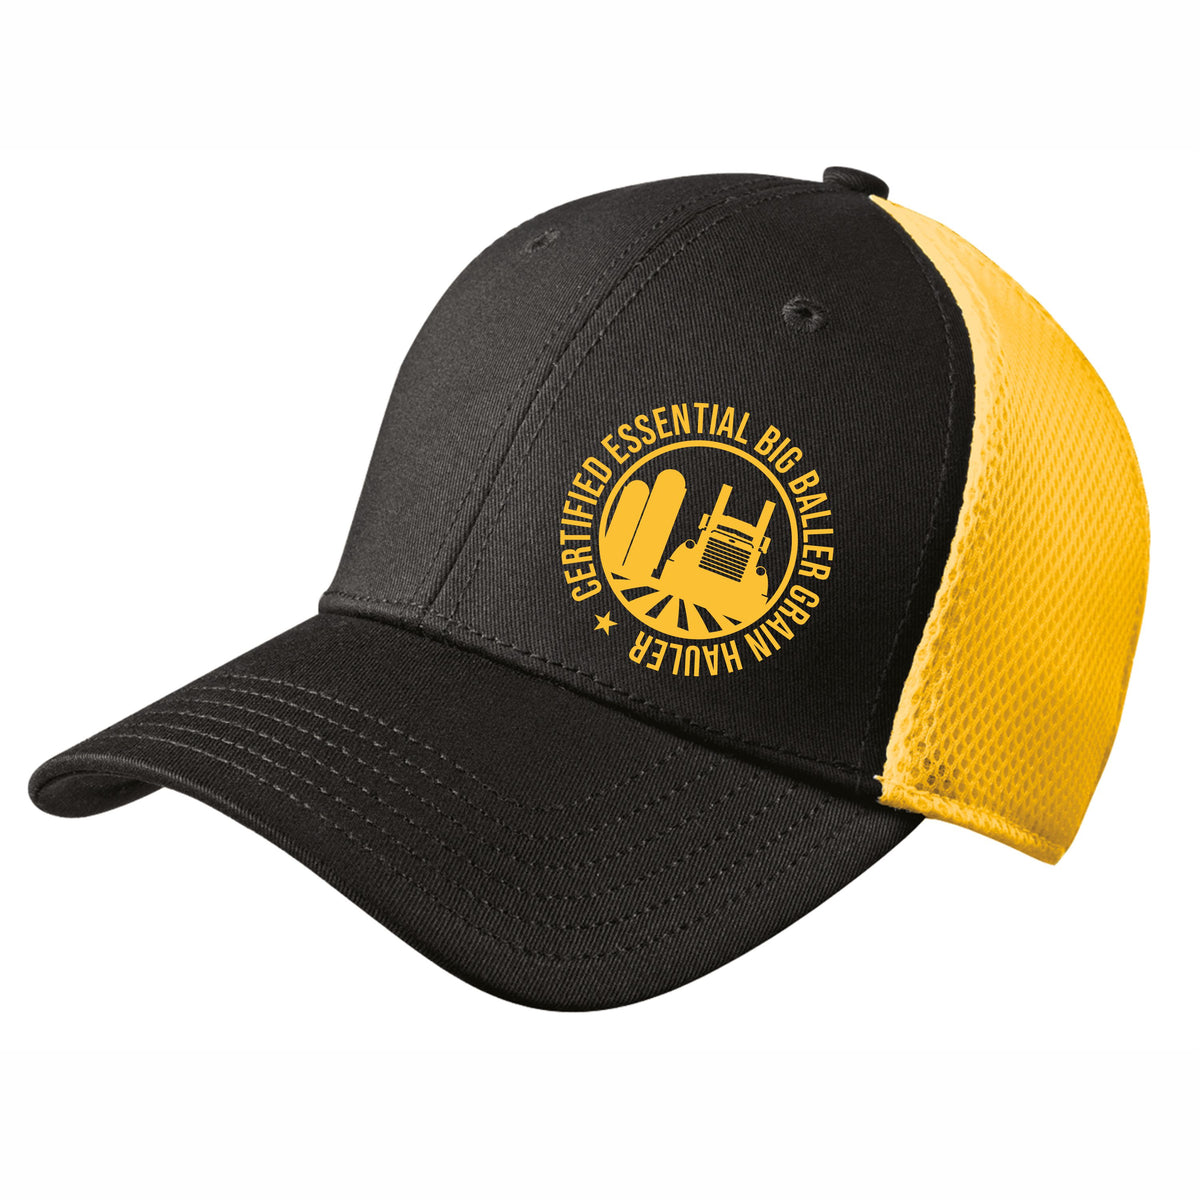 Certified Essential Big Baller Grain Hauler Fitted Hat Free Shipping